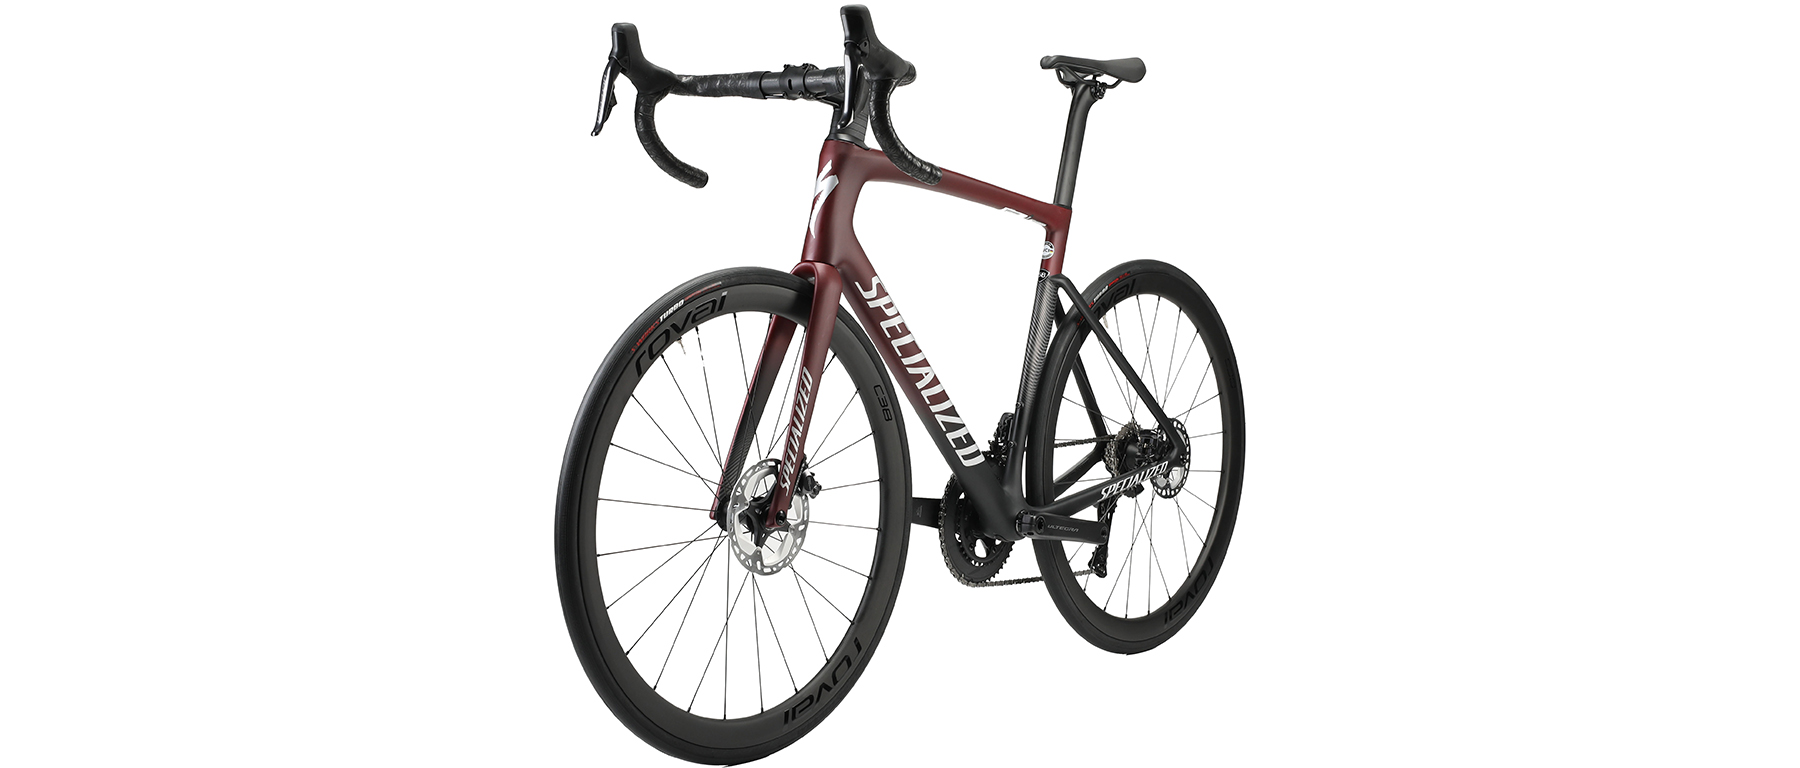 Specialized Tarmac SL7 Expert Ultegra R8170 Di2 Bicycle 2022